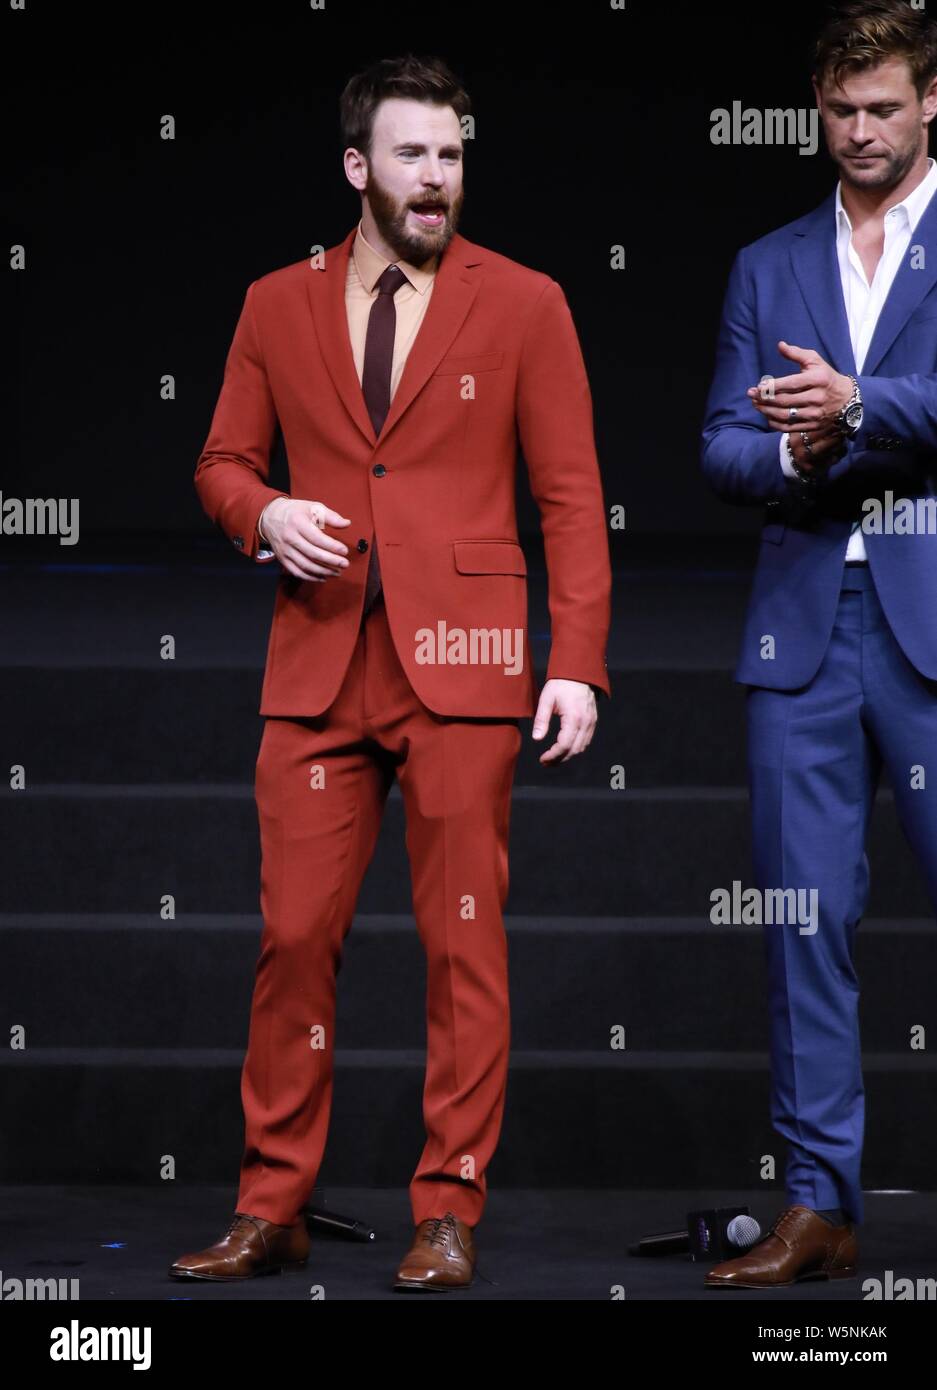 Chris Evans, left, and Chris Hemsworth attend a premiere event for the movie 'Avengers: Endgame' in Shanghai, China, 18 April 2019. Stock Photo